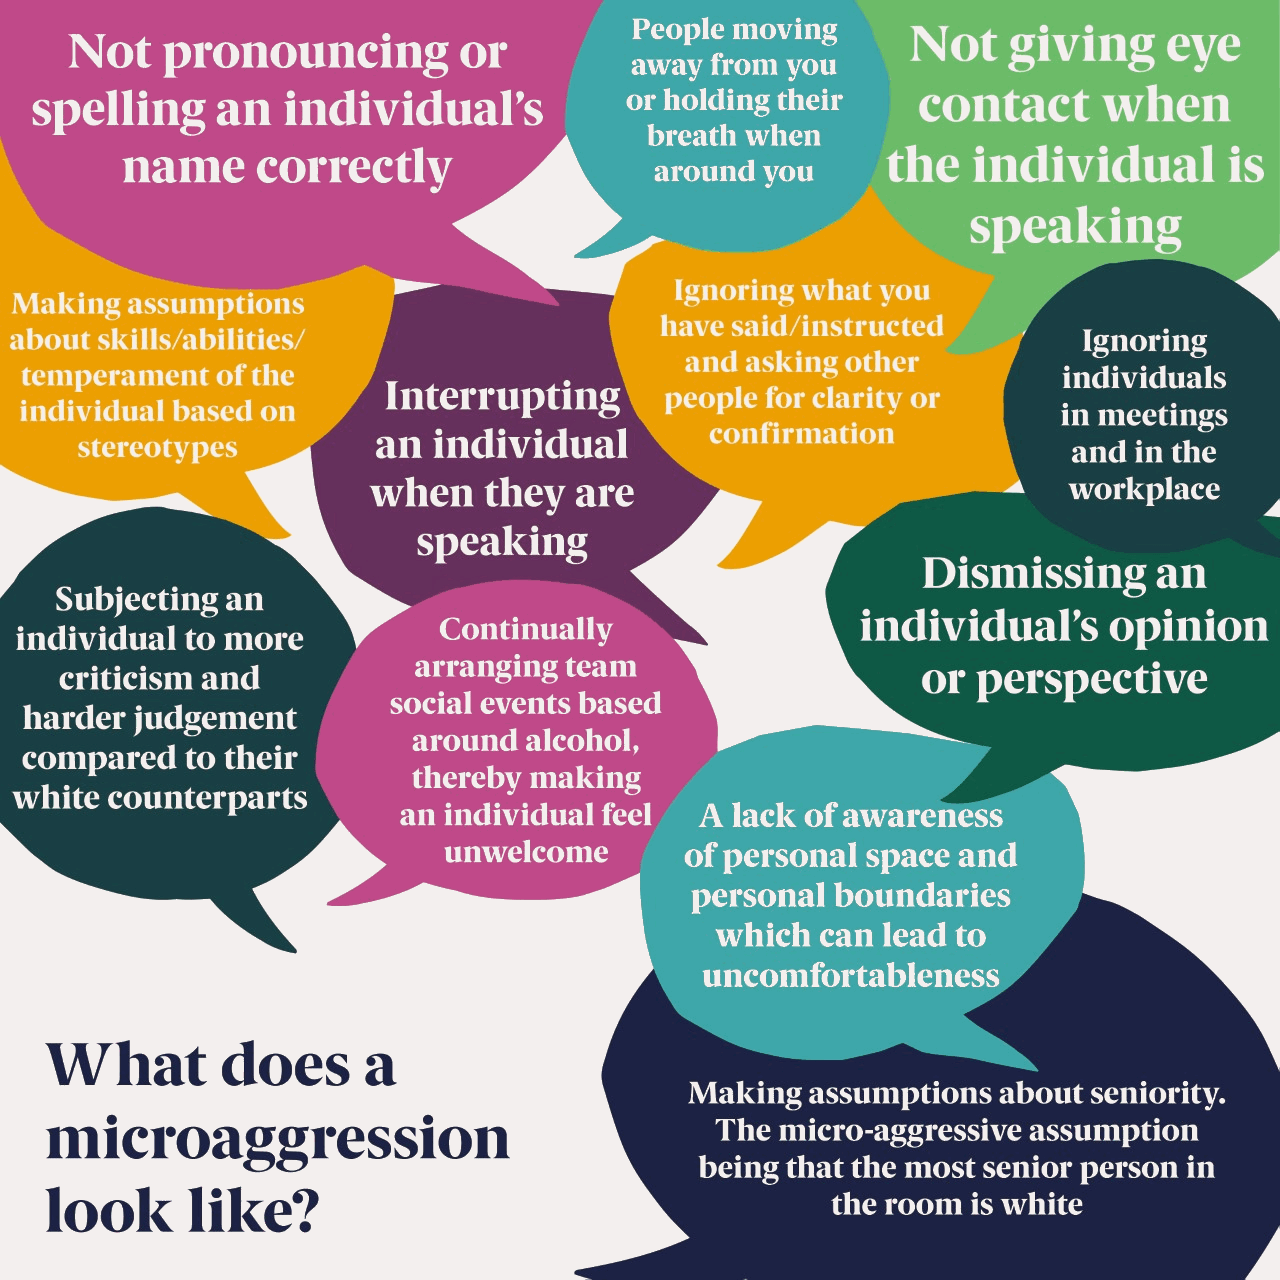 What does a microaggression look like? Not pronouncing or spelling an individual’s name correctly, People moving away from you or holding their breath when around you, Not giving eye contact when the individual is speaking, Making assumptions about skills/abilities/temperament of the individual based on stereotypes, Interrupting an individual when they are speaking, Ignoring what you have said/instructed and asking other people for clarity or confirmation, Ignoring individuals in meeting and in the workplace, Subjecting an individual to more criticism and harder judgement compared to their white counterparts, Continually arranging team social events based around alcohol thereby making an individual feel unwelcome, Dismissing an individual’s opinion or perspective, A lack of awareness of personal space and personal boundaries which can lead to uncomfortableness, Making assumptions about seniority such as the assumption that the most senior person in the room is white.